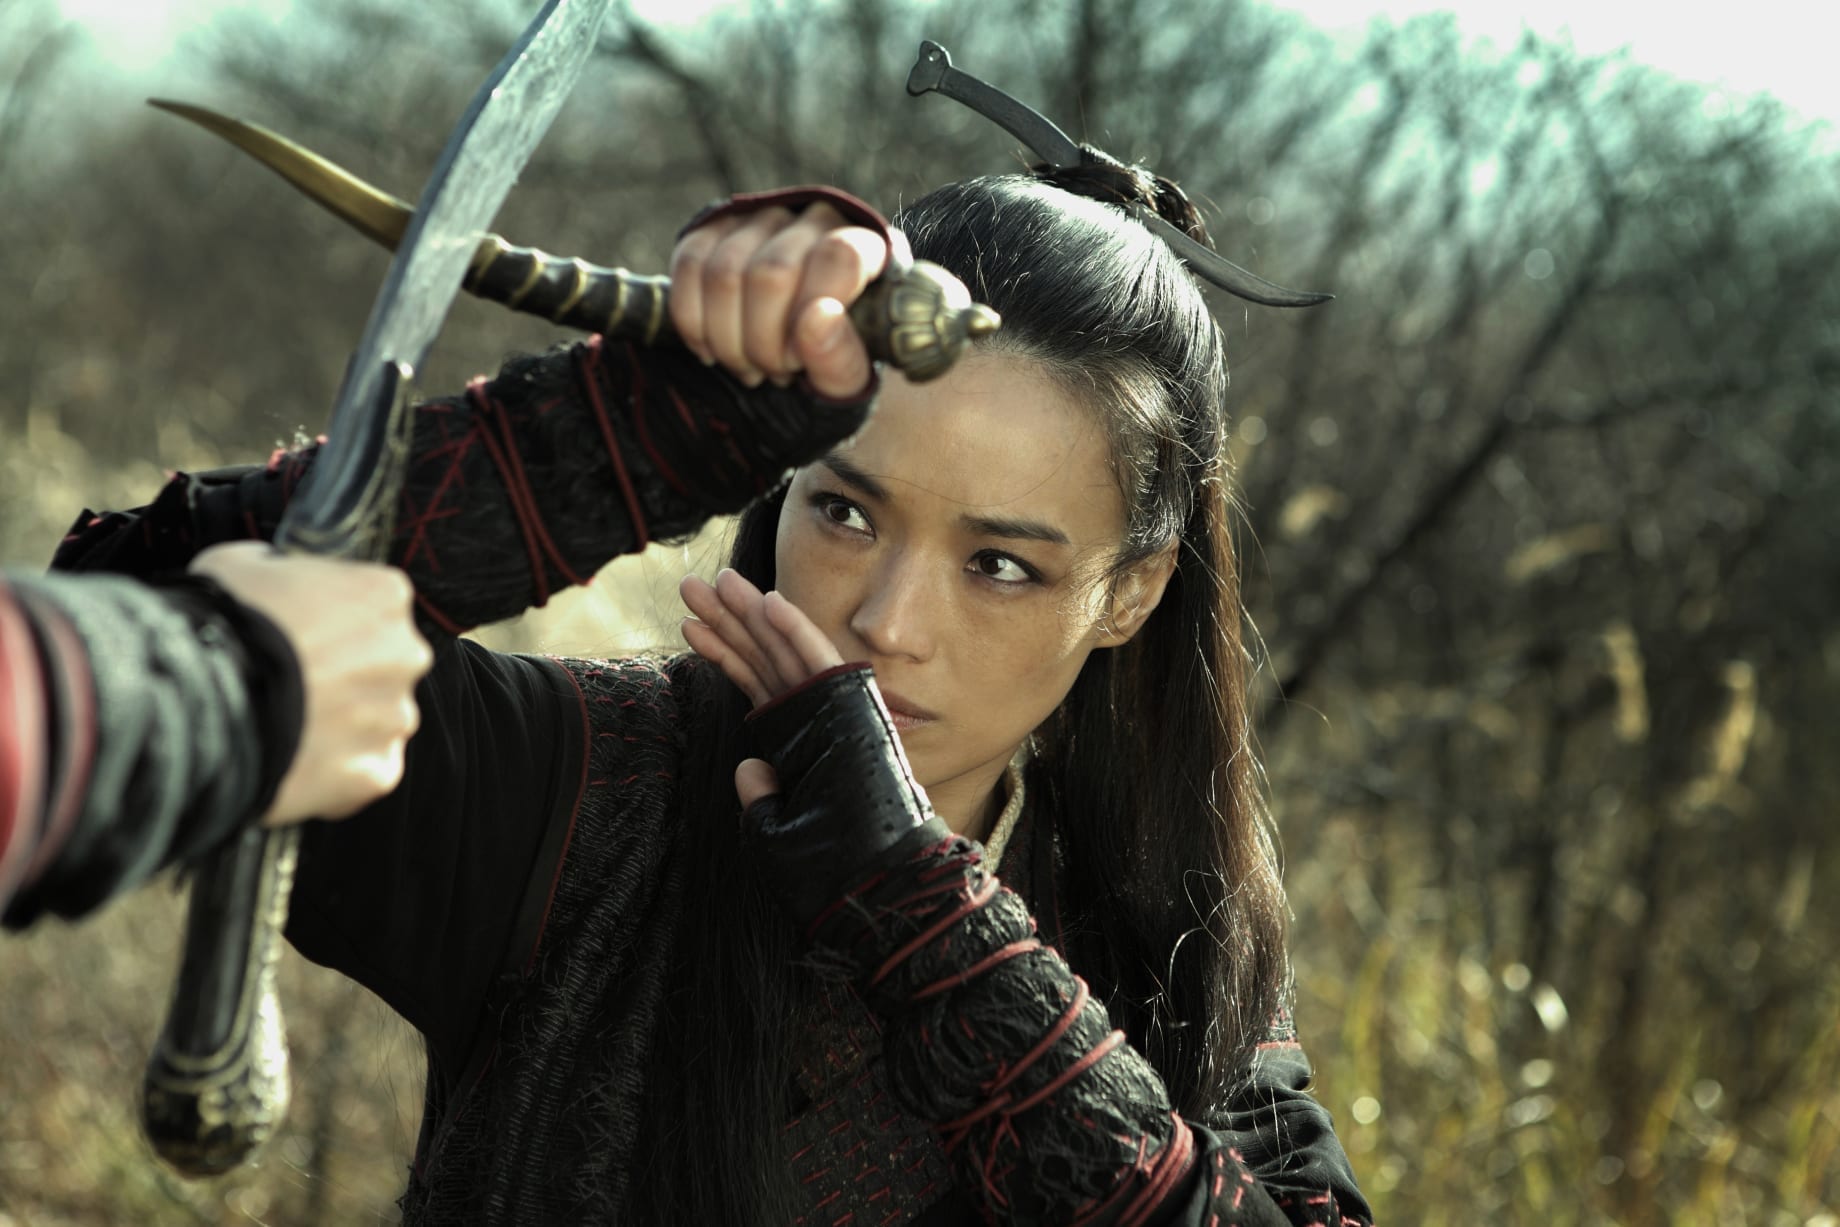 Still image from the film "The Assassin"